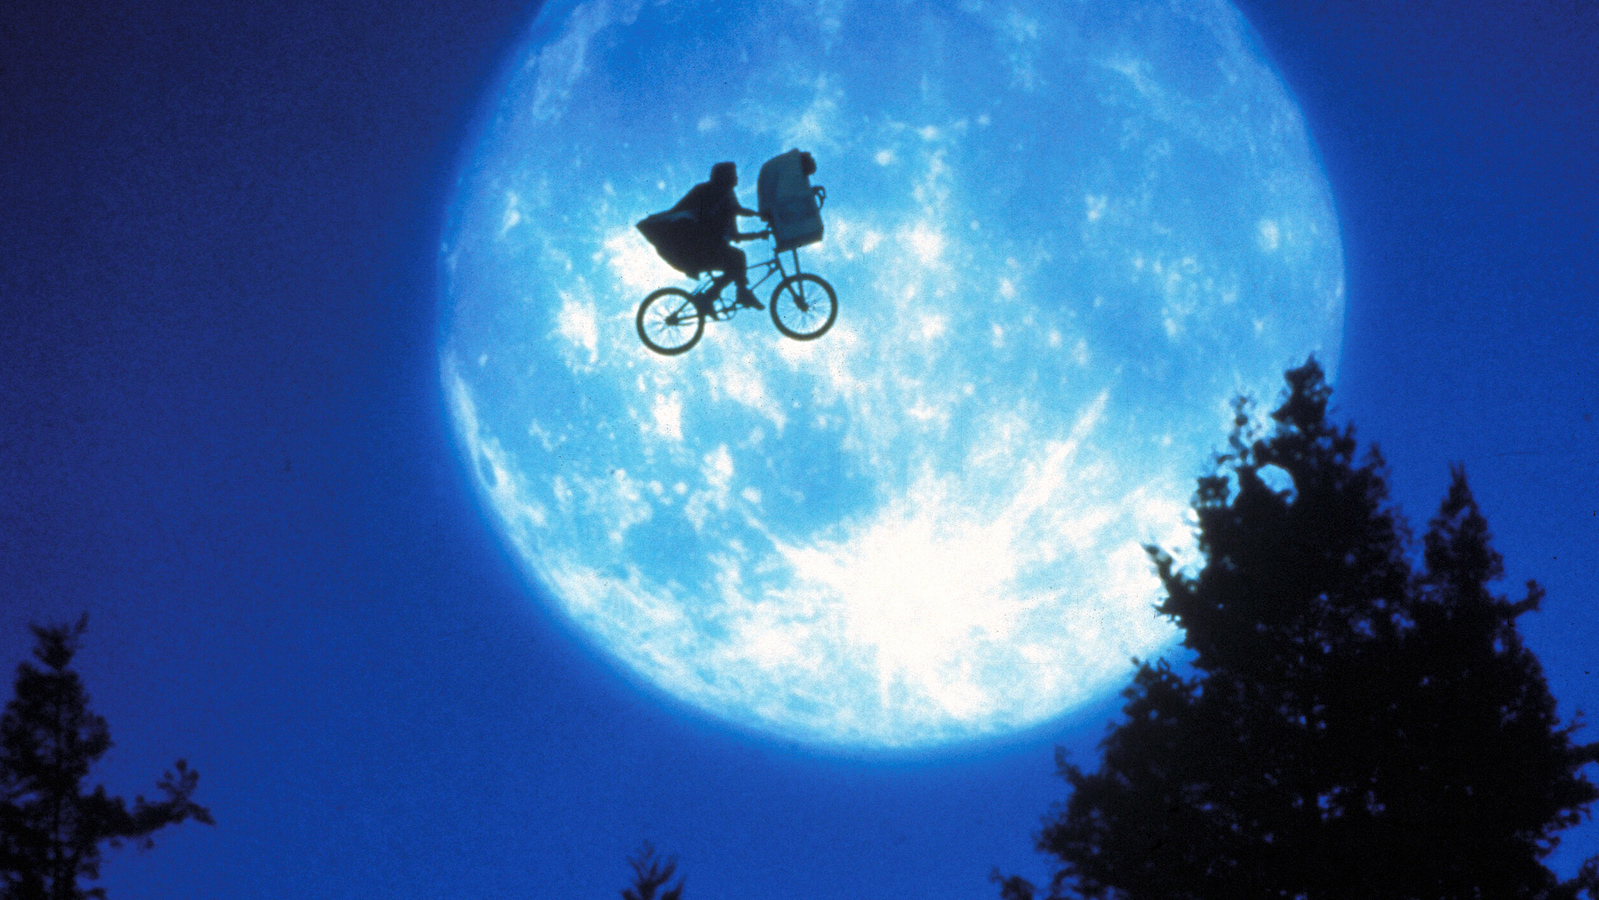 E.T. the Extra Terrestrial